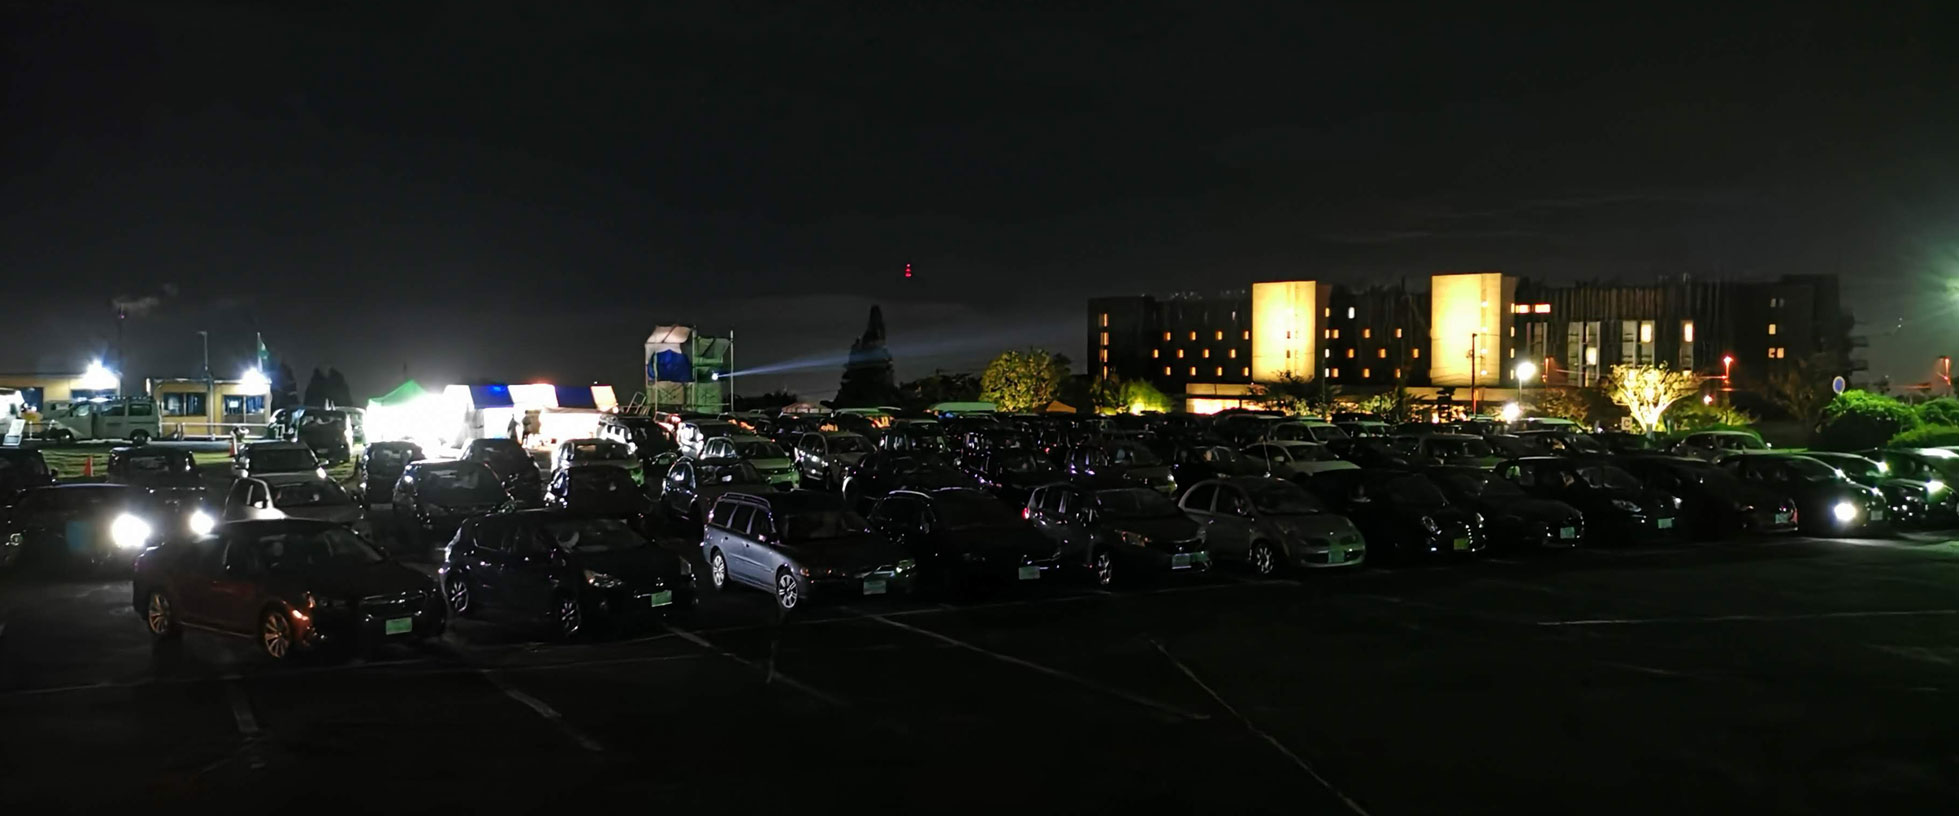 drive_in_theater_02